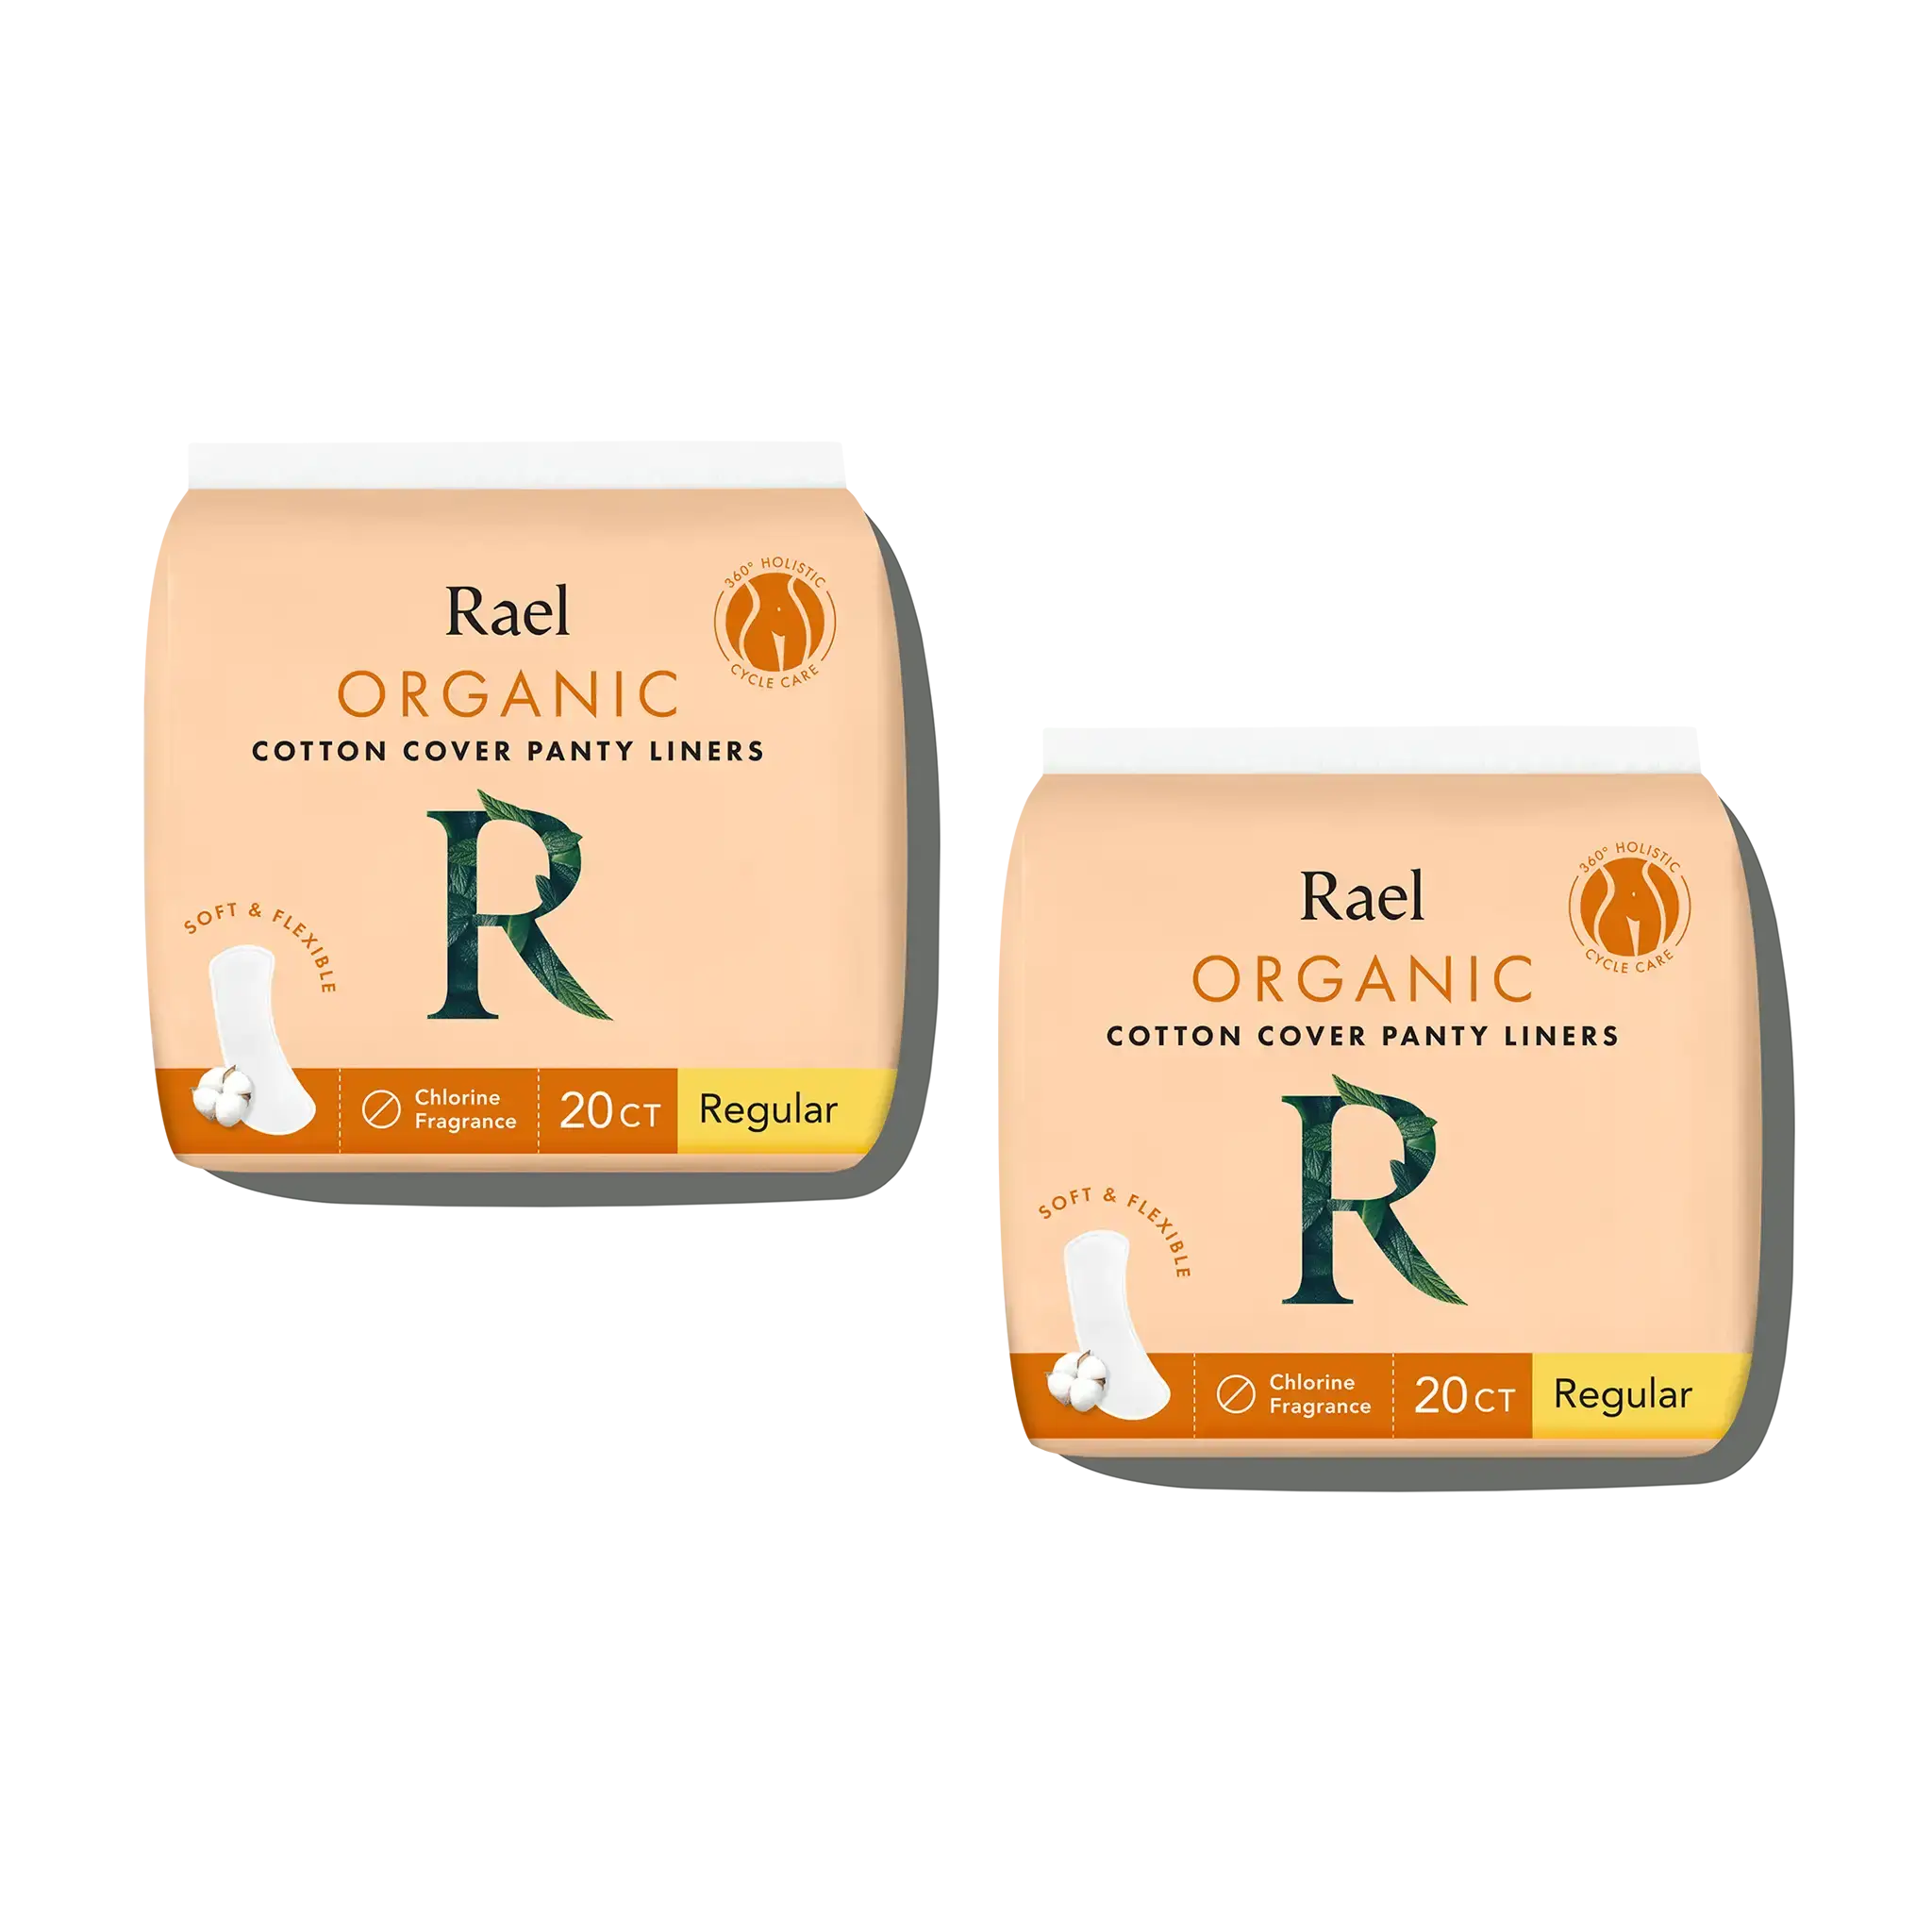 Wholesale Rael Organic Cotton Cover Pads - Regular for your store